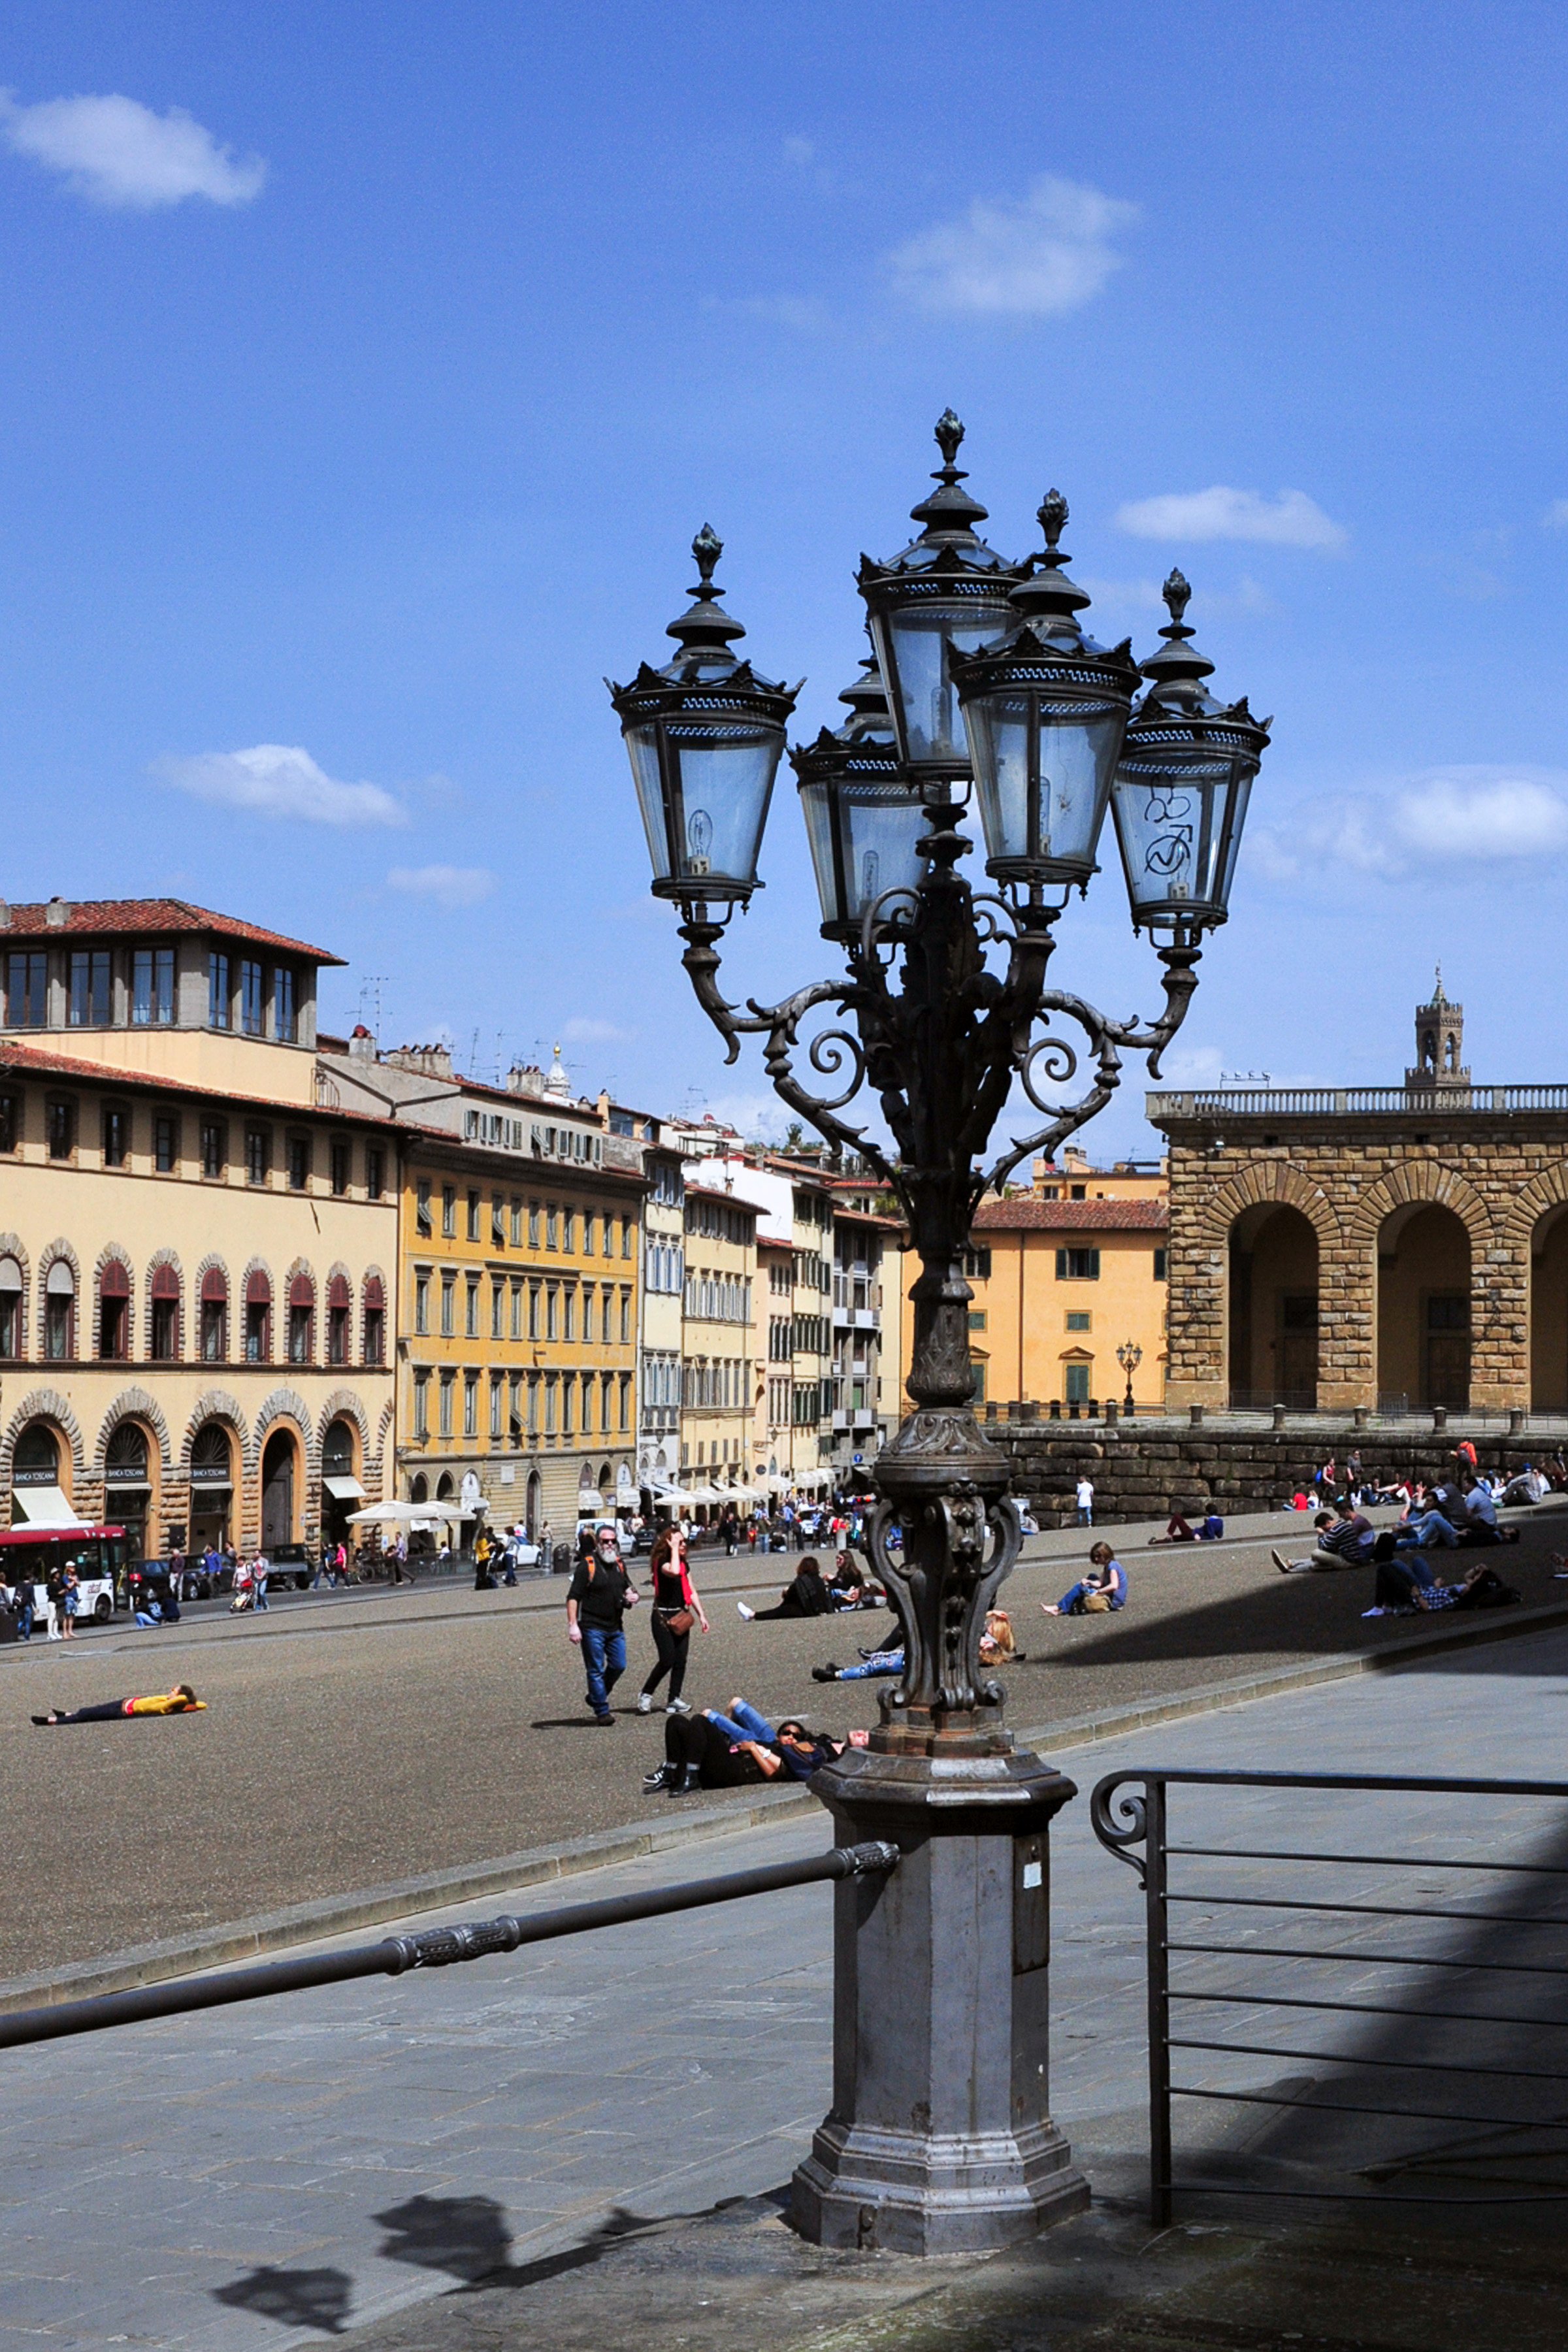 Piazza de' Pitti (the Carabinieri station is in the palazzo on the right)